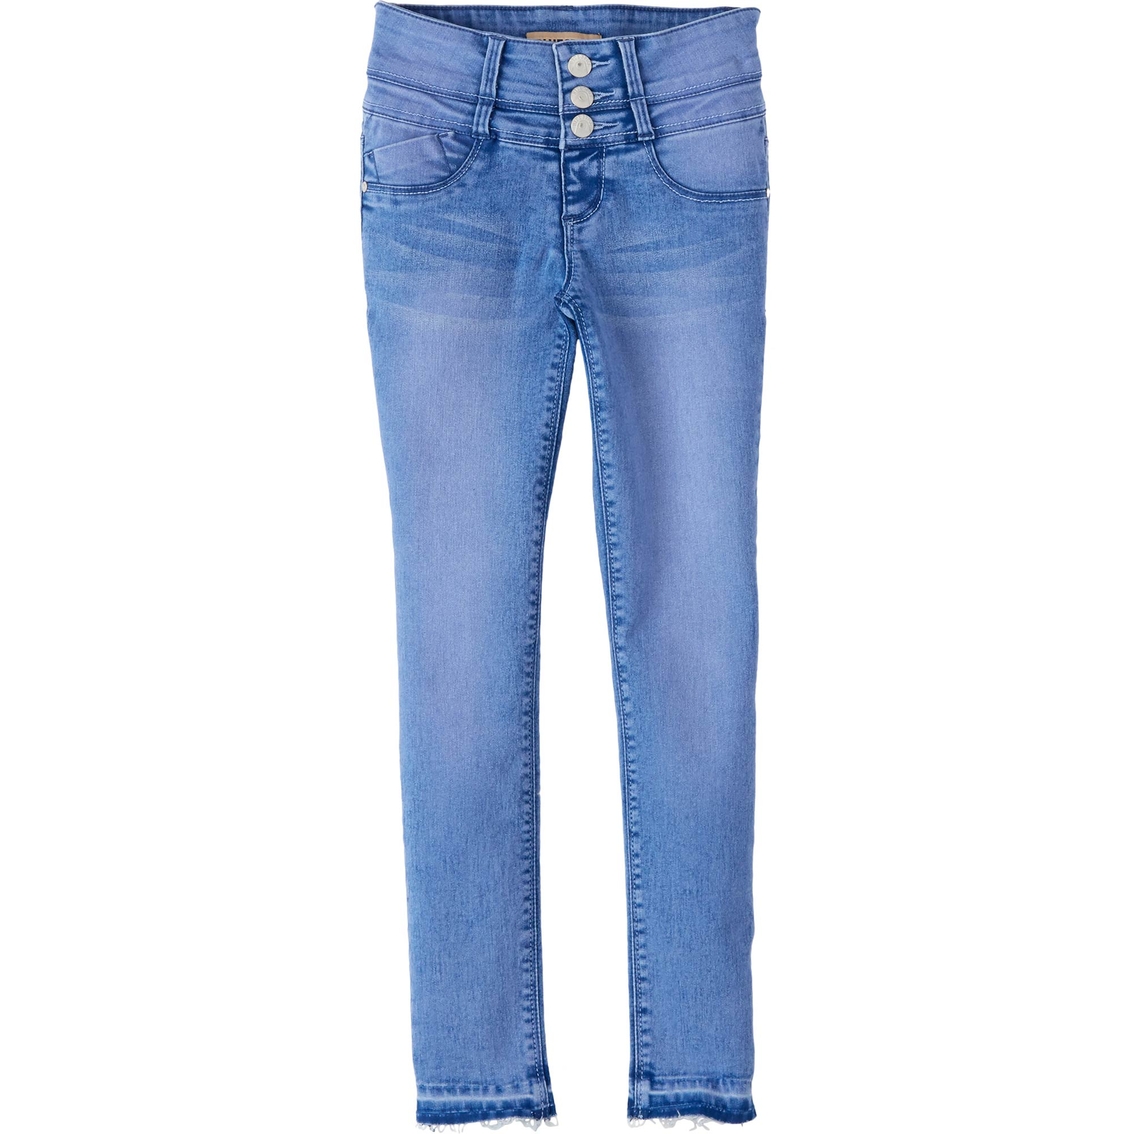 Squeeze Girls Release Hem Jeans | Girls 7-16 | Clothing & Accessories ...